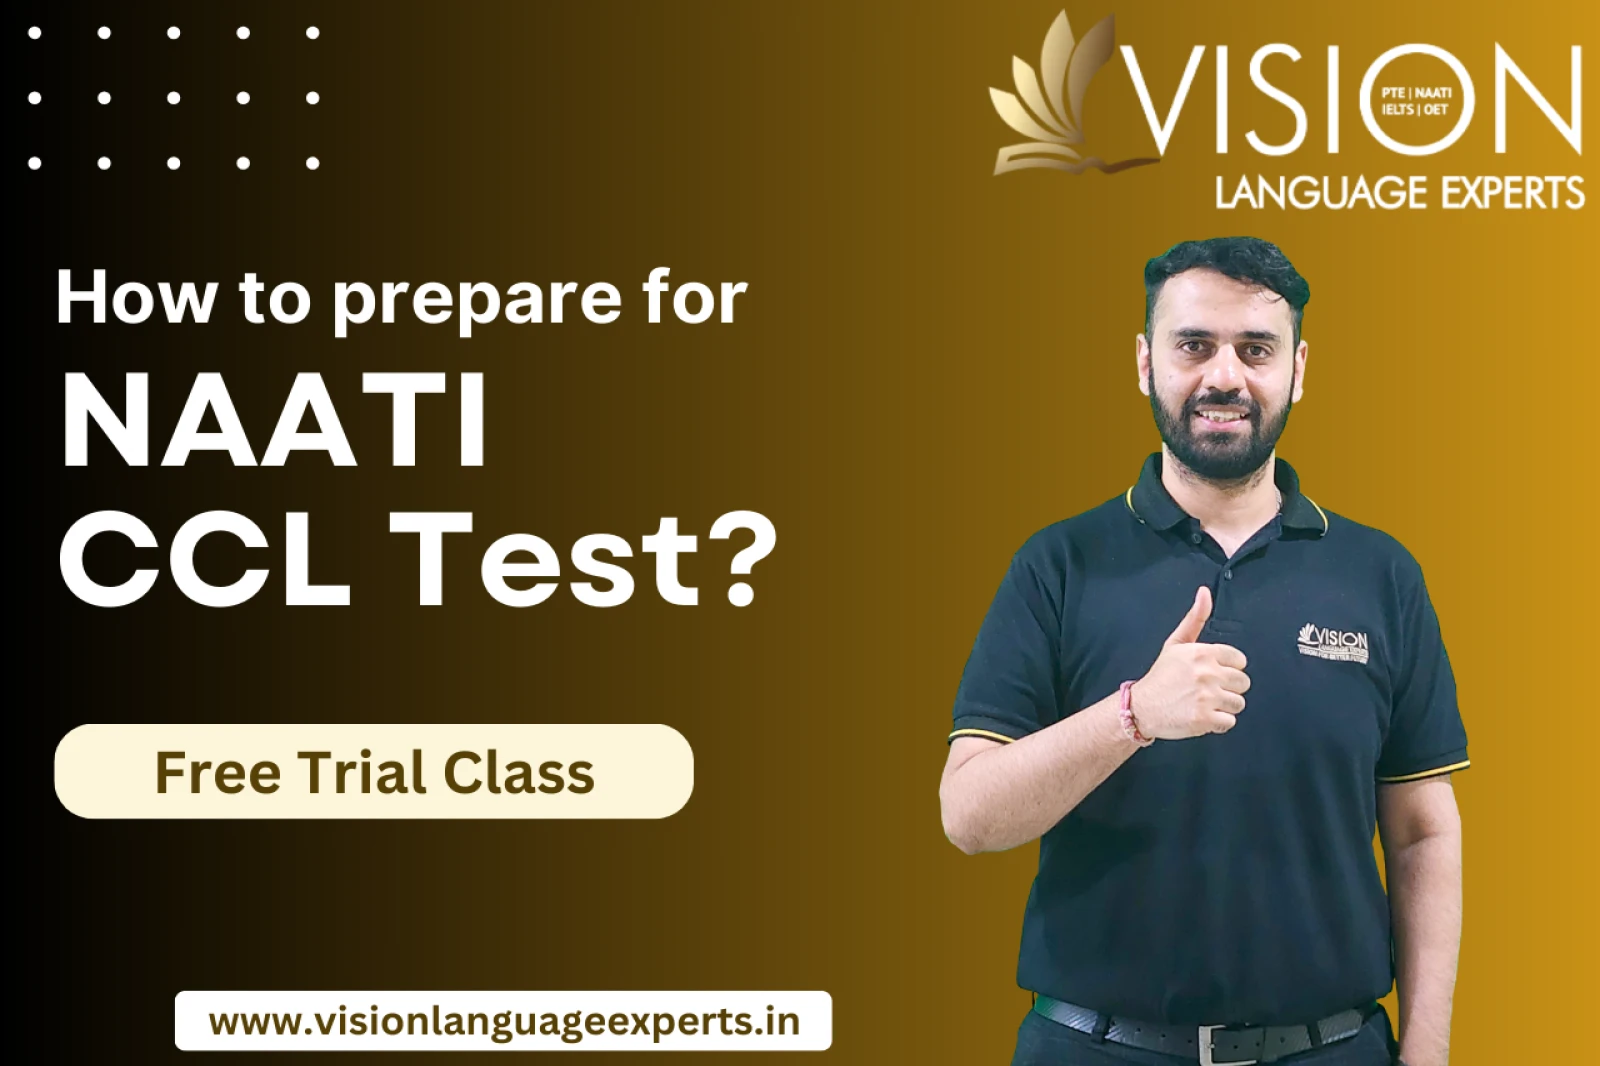 How to prepare for naati ccl test?